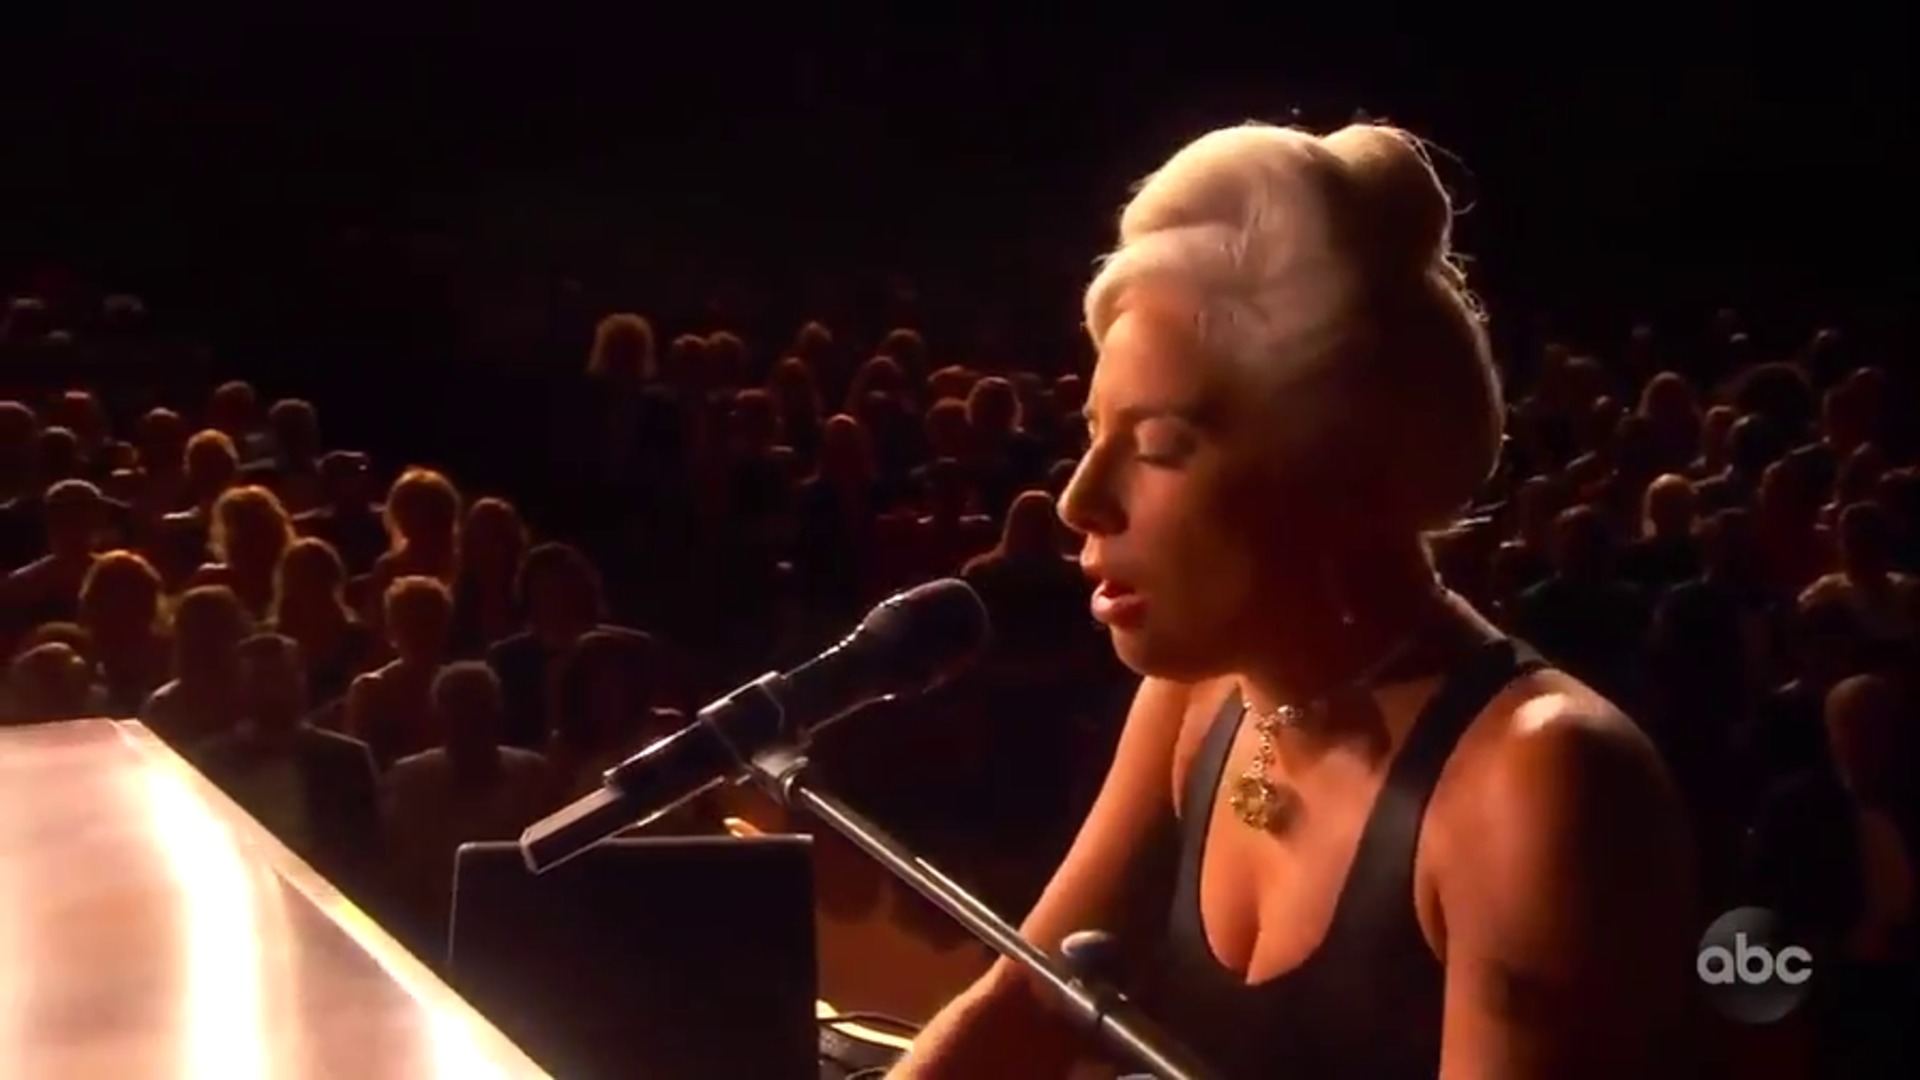 WATCH: Lady Gaga and Bradley Cooper perform “Shallow” live at the 2019 Oscars ...1920 x 1080